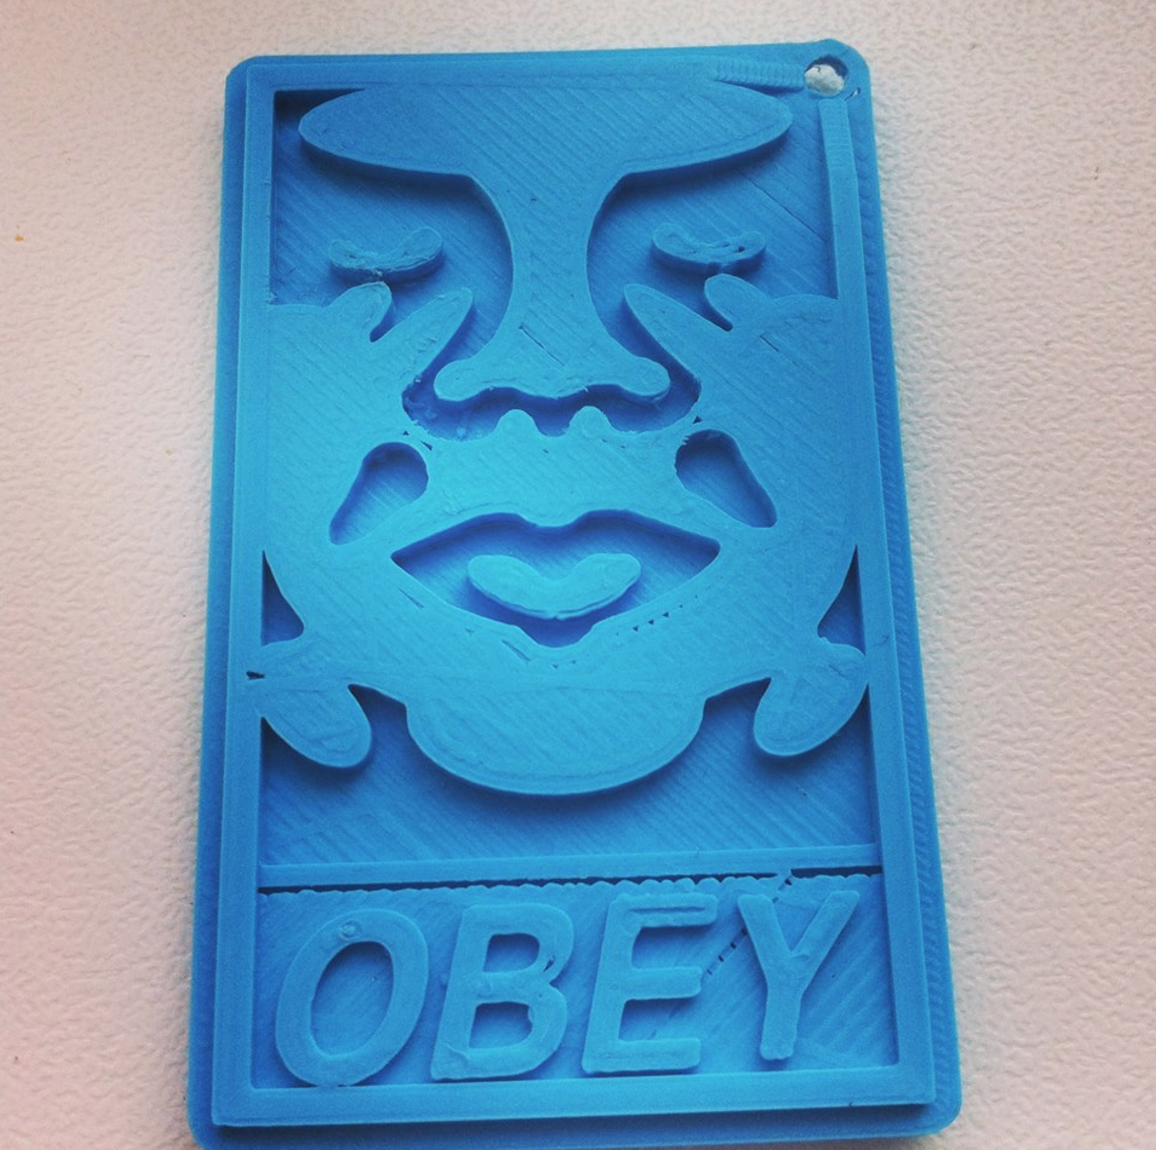 Capture d’écran 2016-12-08 à 11.22.53.png Download free STL file Obey Andre the giant keychain • 3D printing model, Mathi_